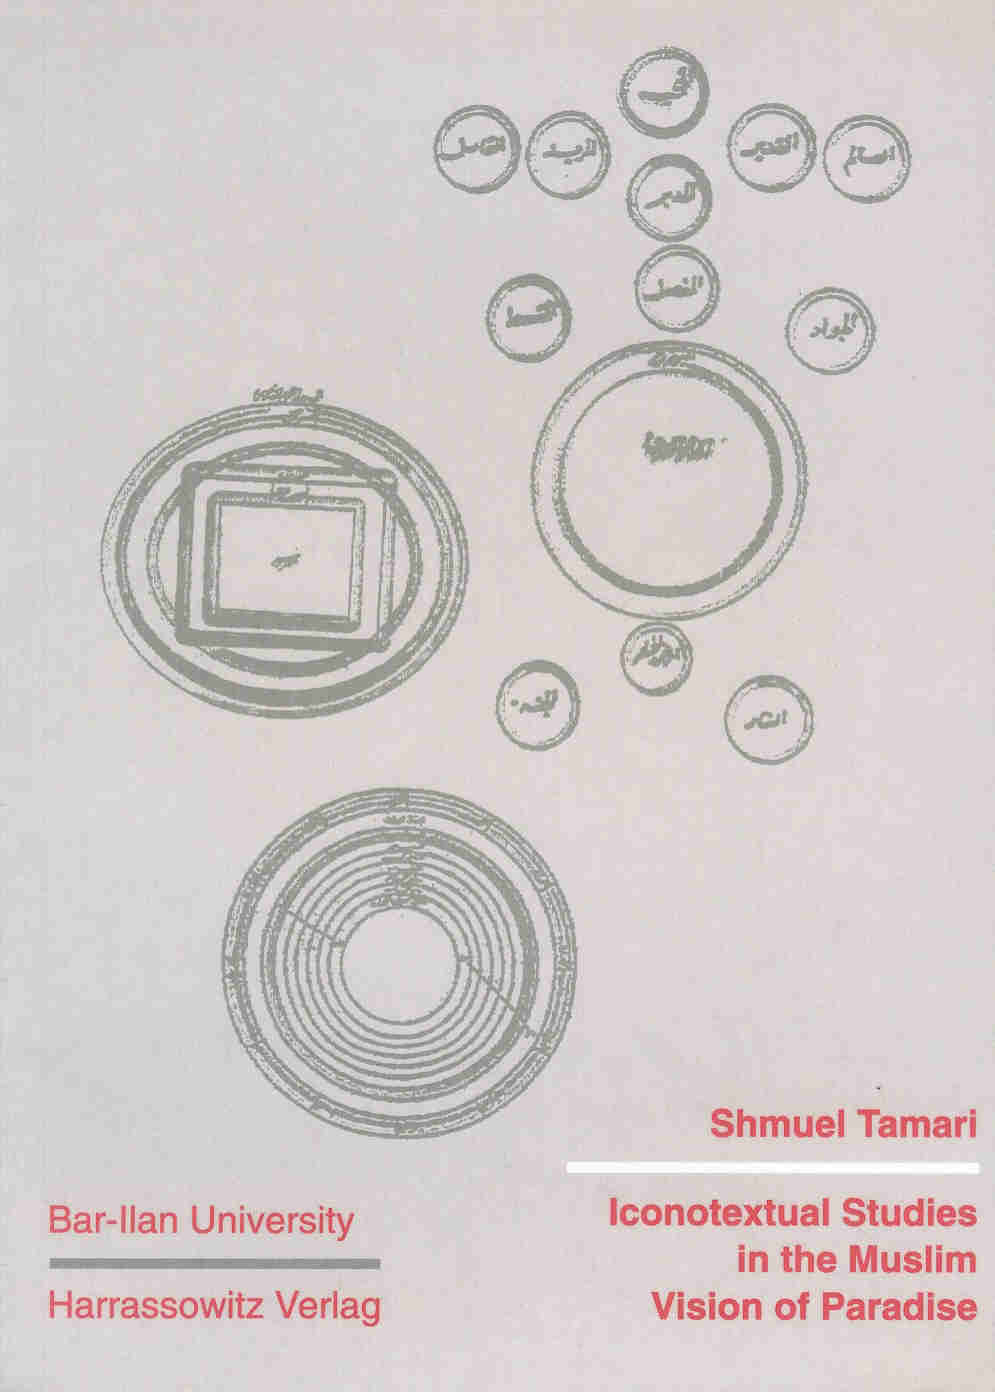 Iconotextual Studies in the Muslim Ideology of Ummayyad Architecture and Urbanism Vol.III